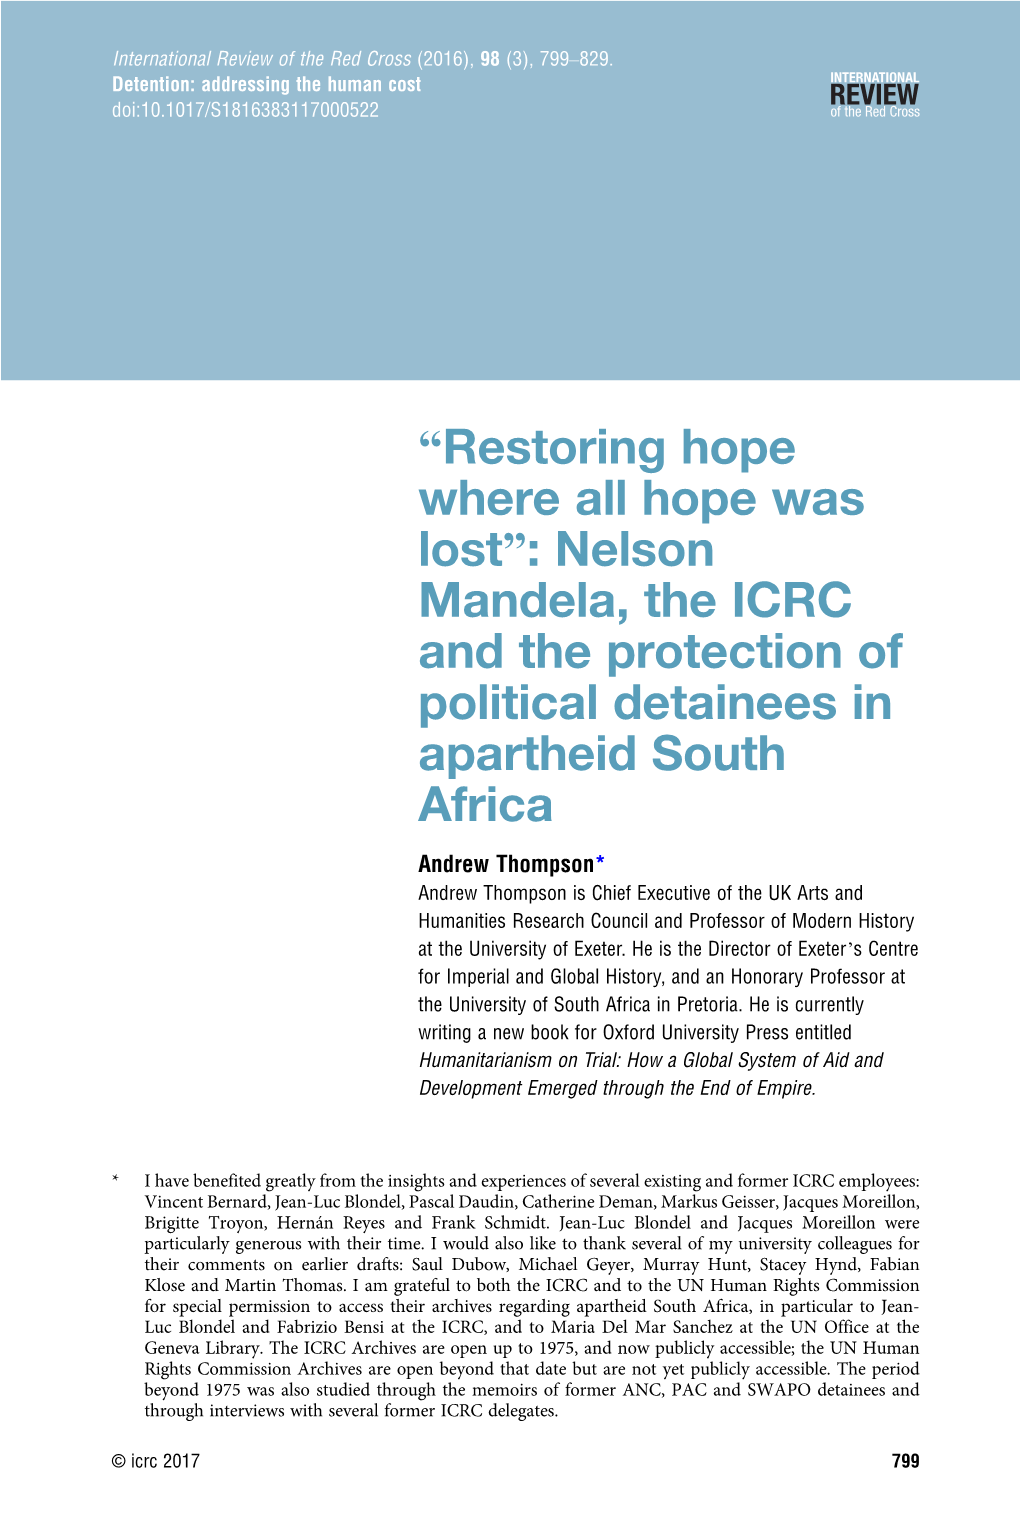 “Restoring Hope Where All Hope Was Lost”: Nelson Mandela, the ICRC